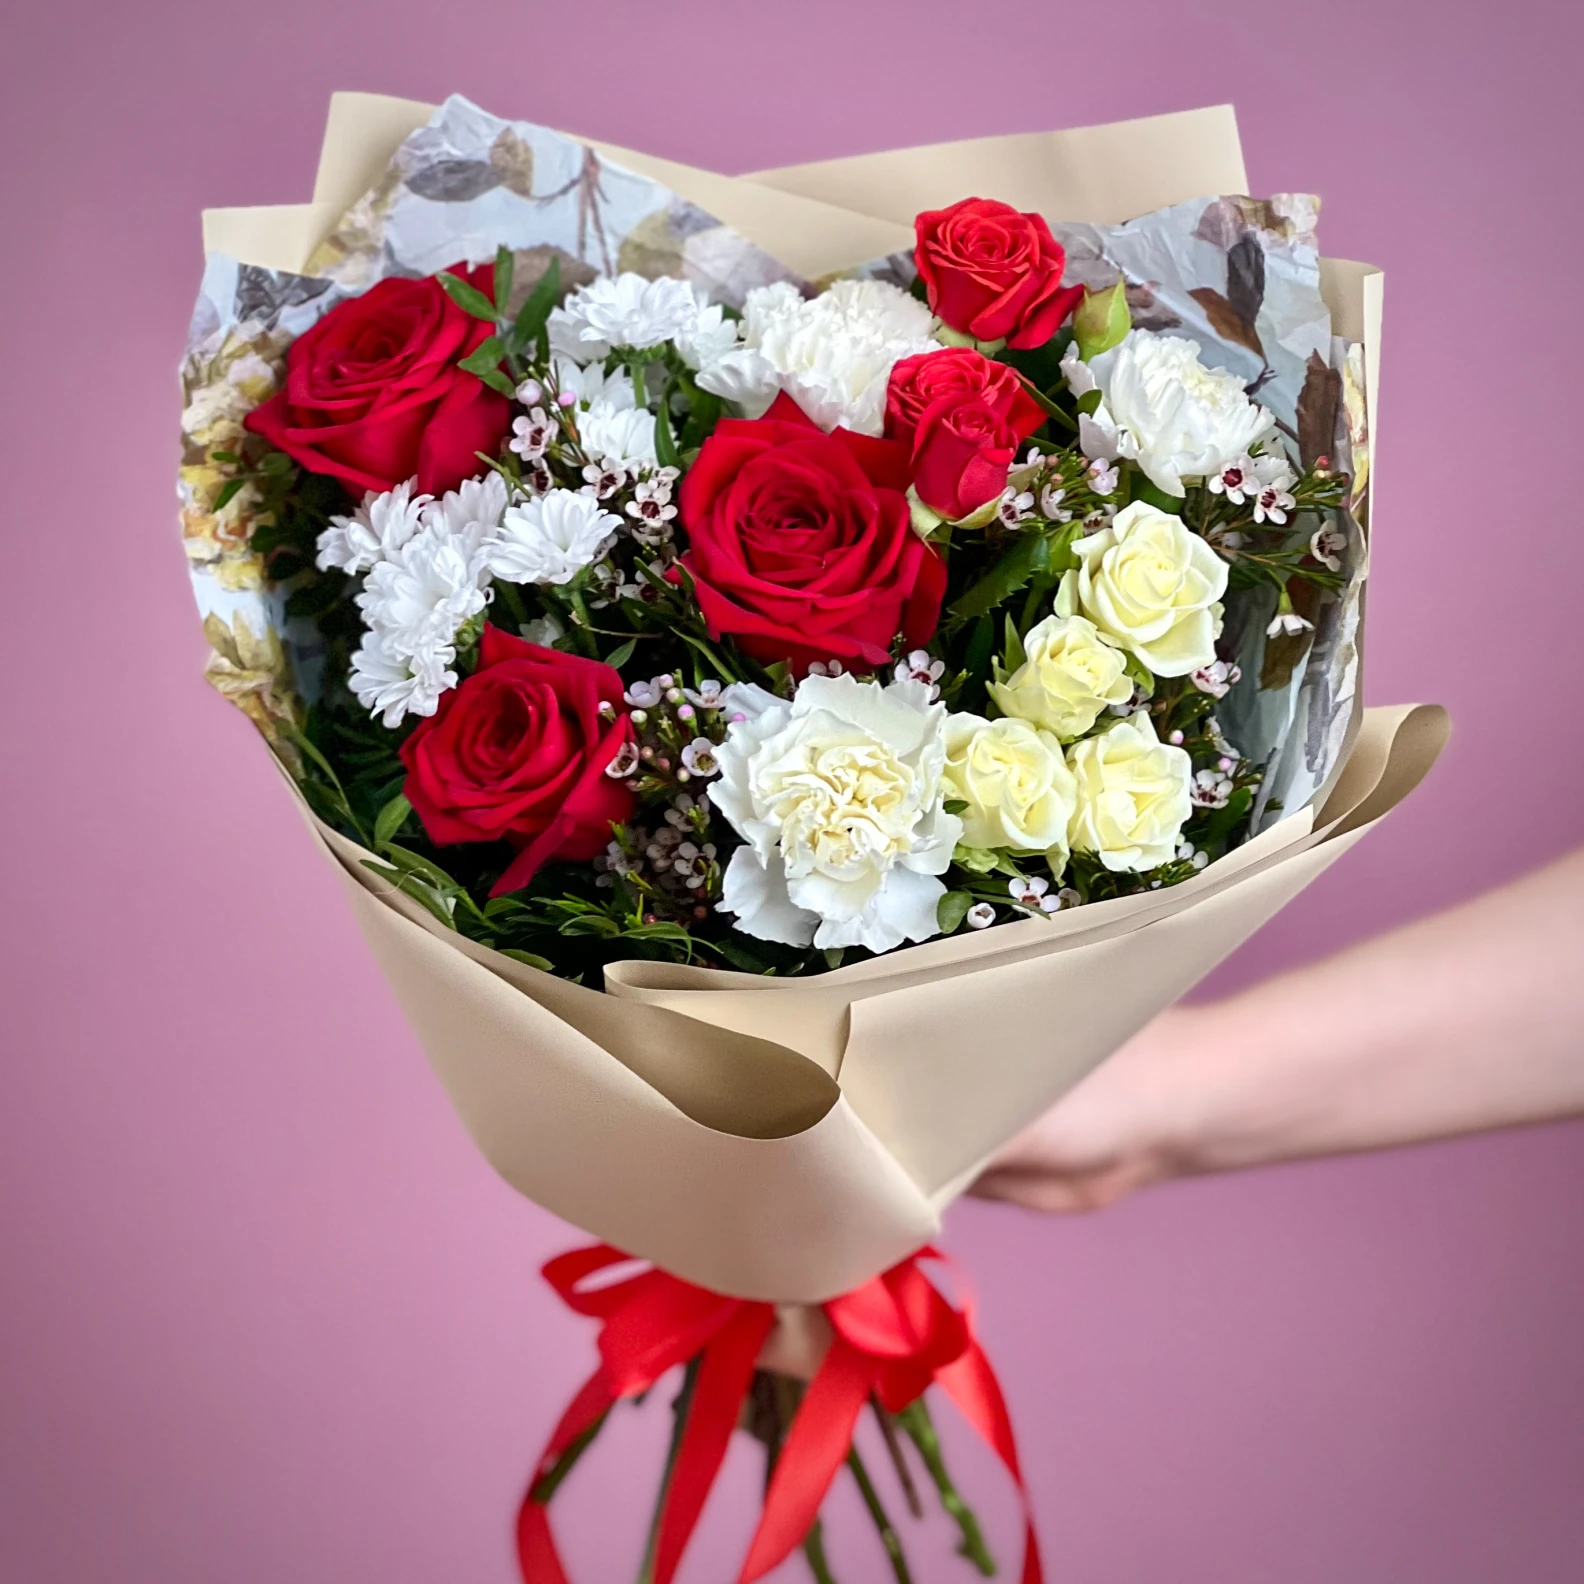 Red and White Bouquet - image №2